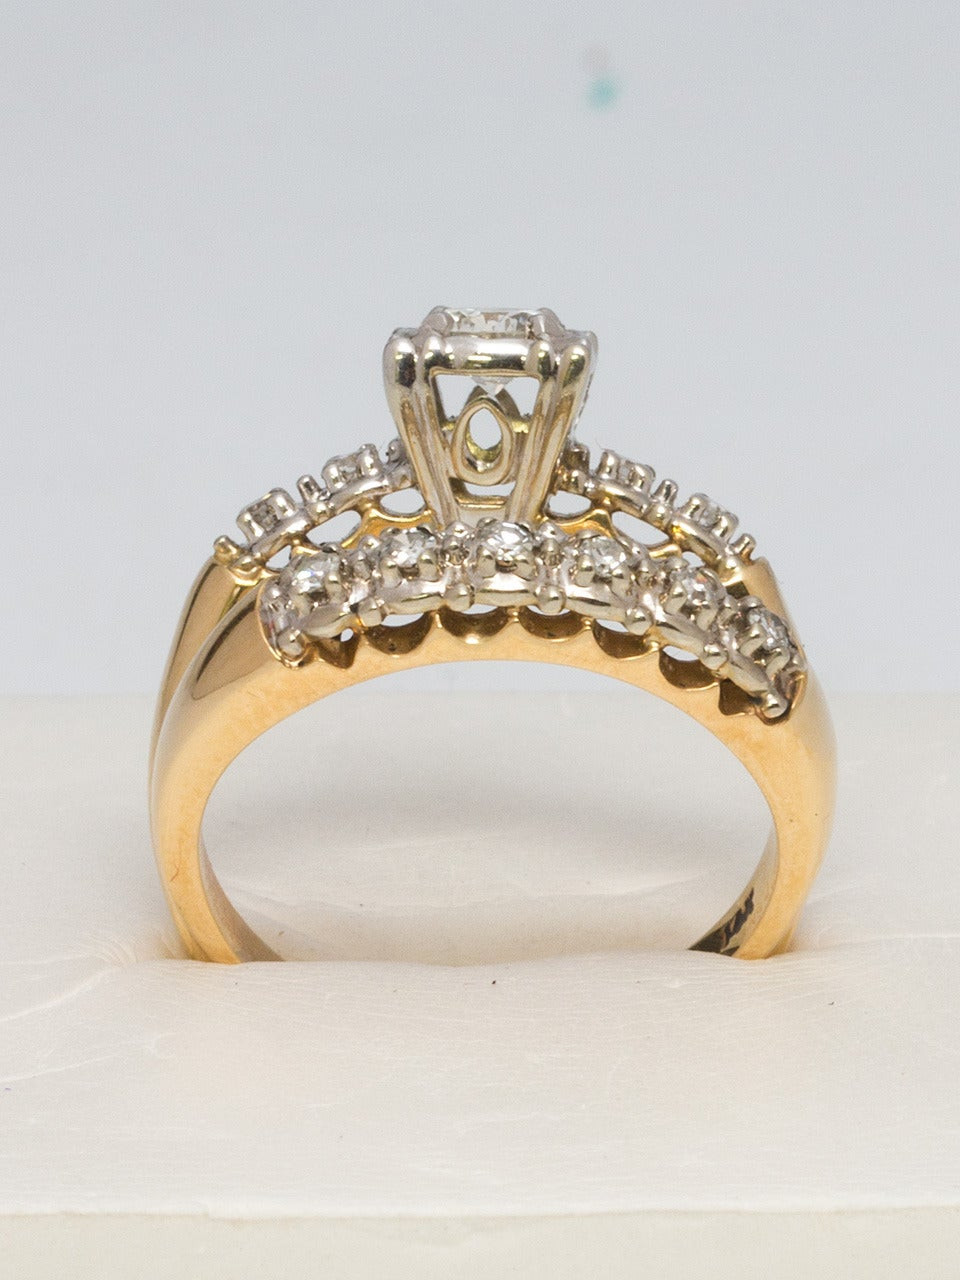 Vintage Wedding Rings For Sale
 1950s Yellow Gold and Diamond Wedding Ring Set For Sale at